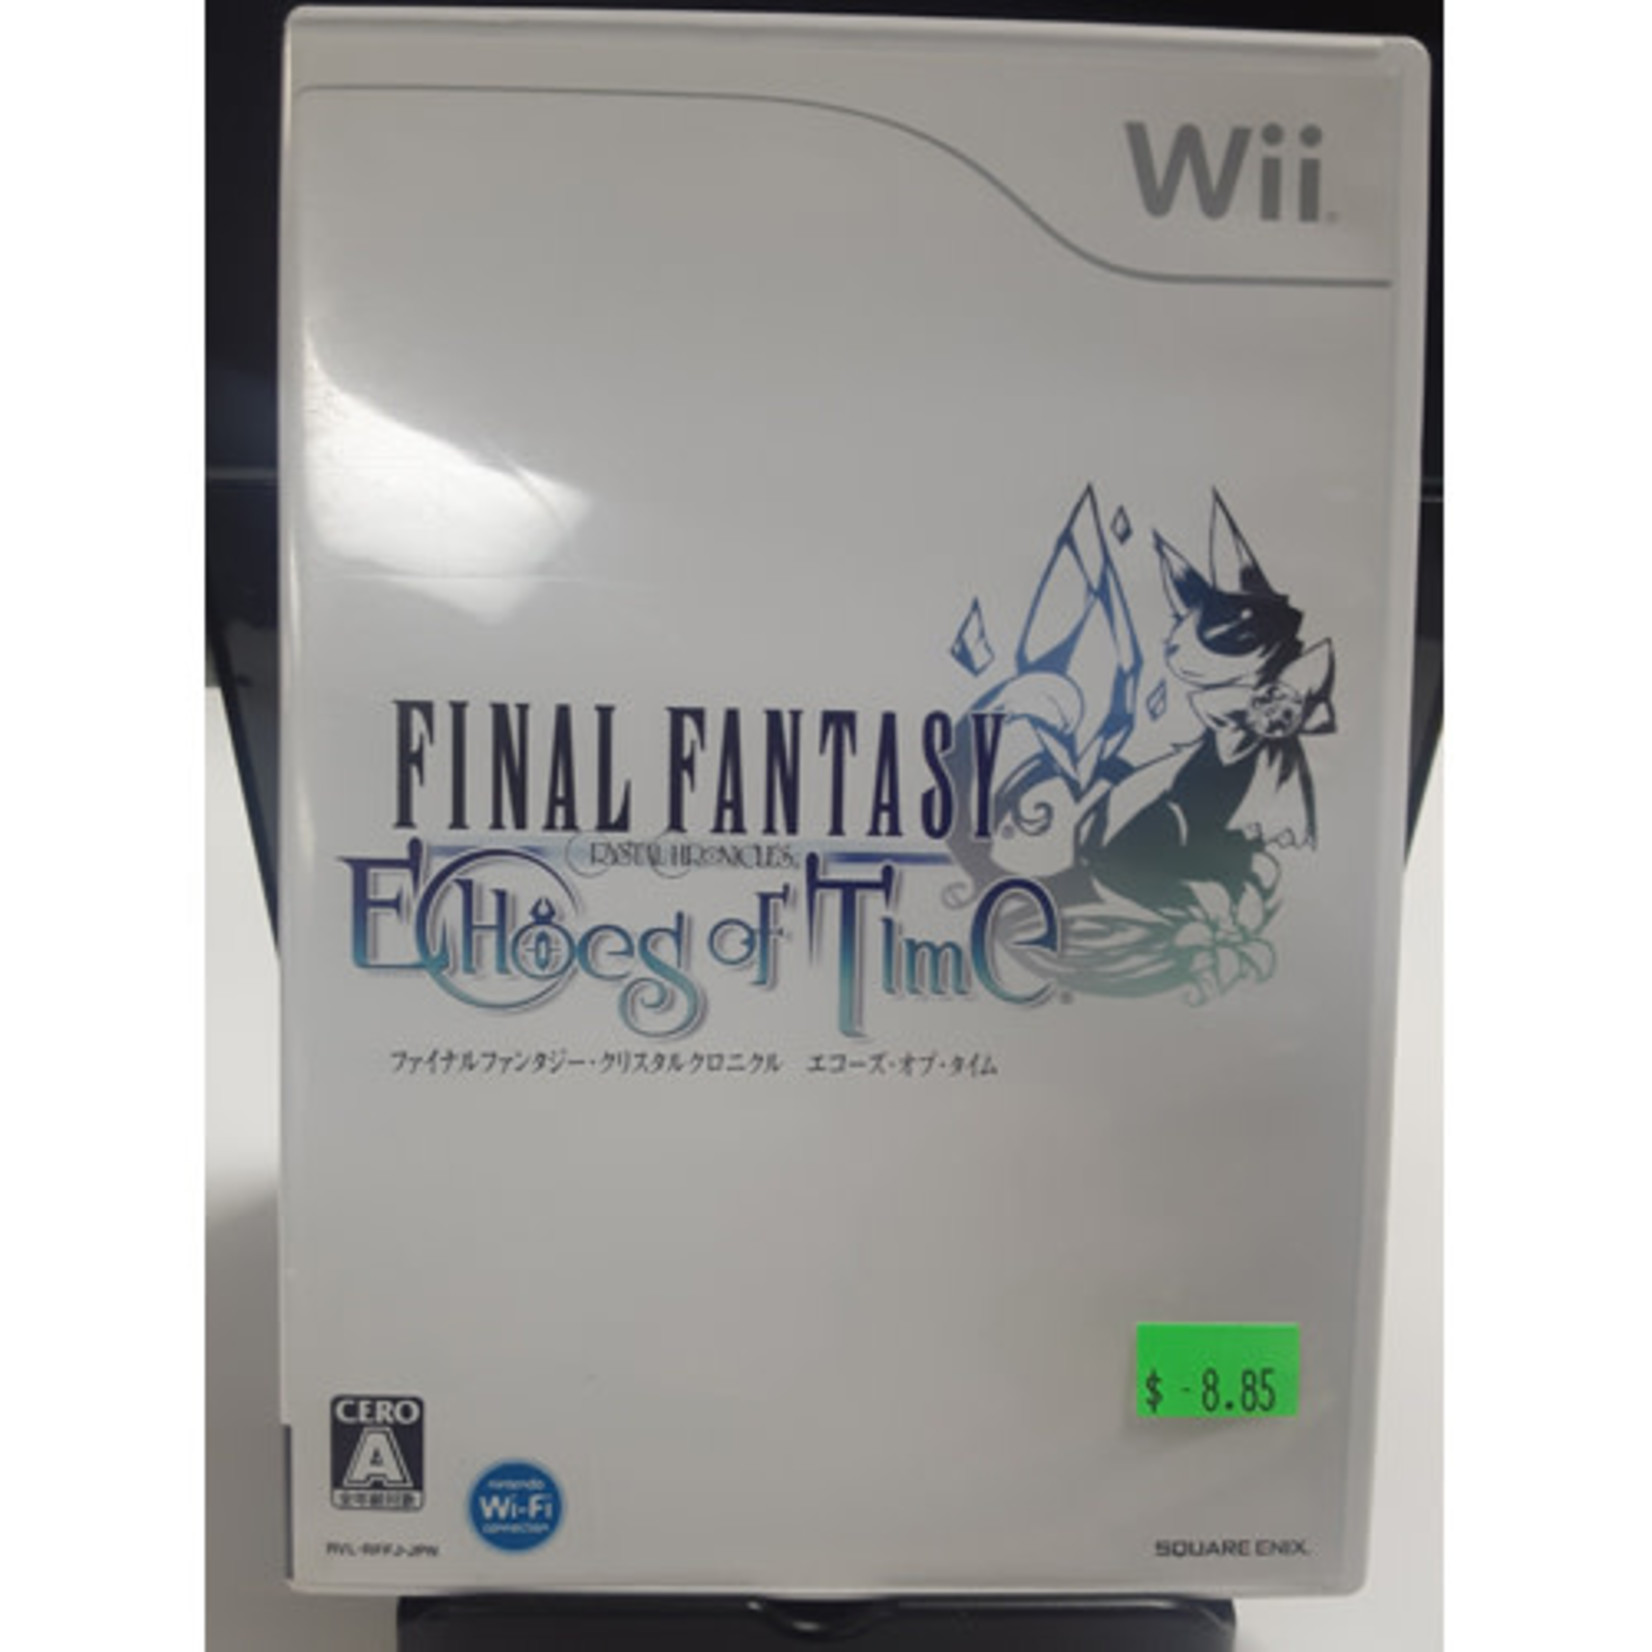 IMPORT-WIIUSD-FINAL FANTASY ECHOES OF TIME